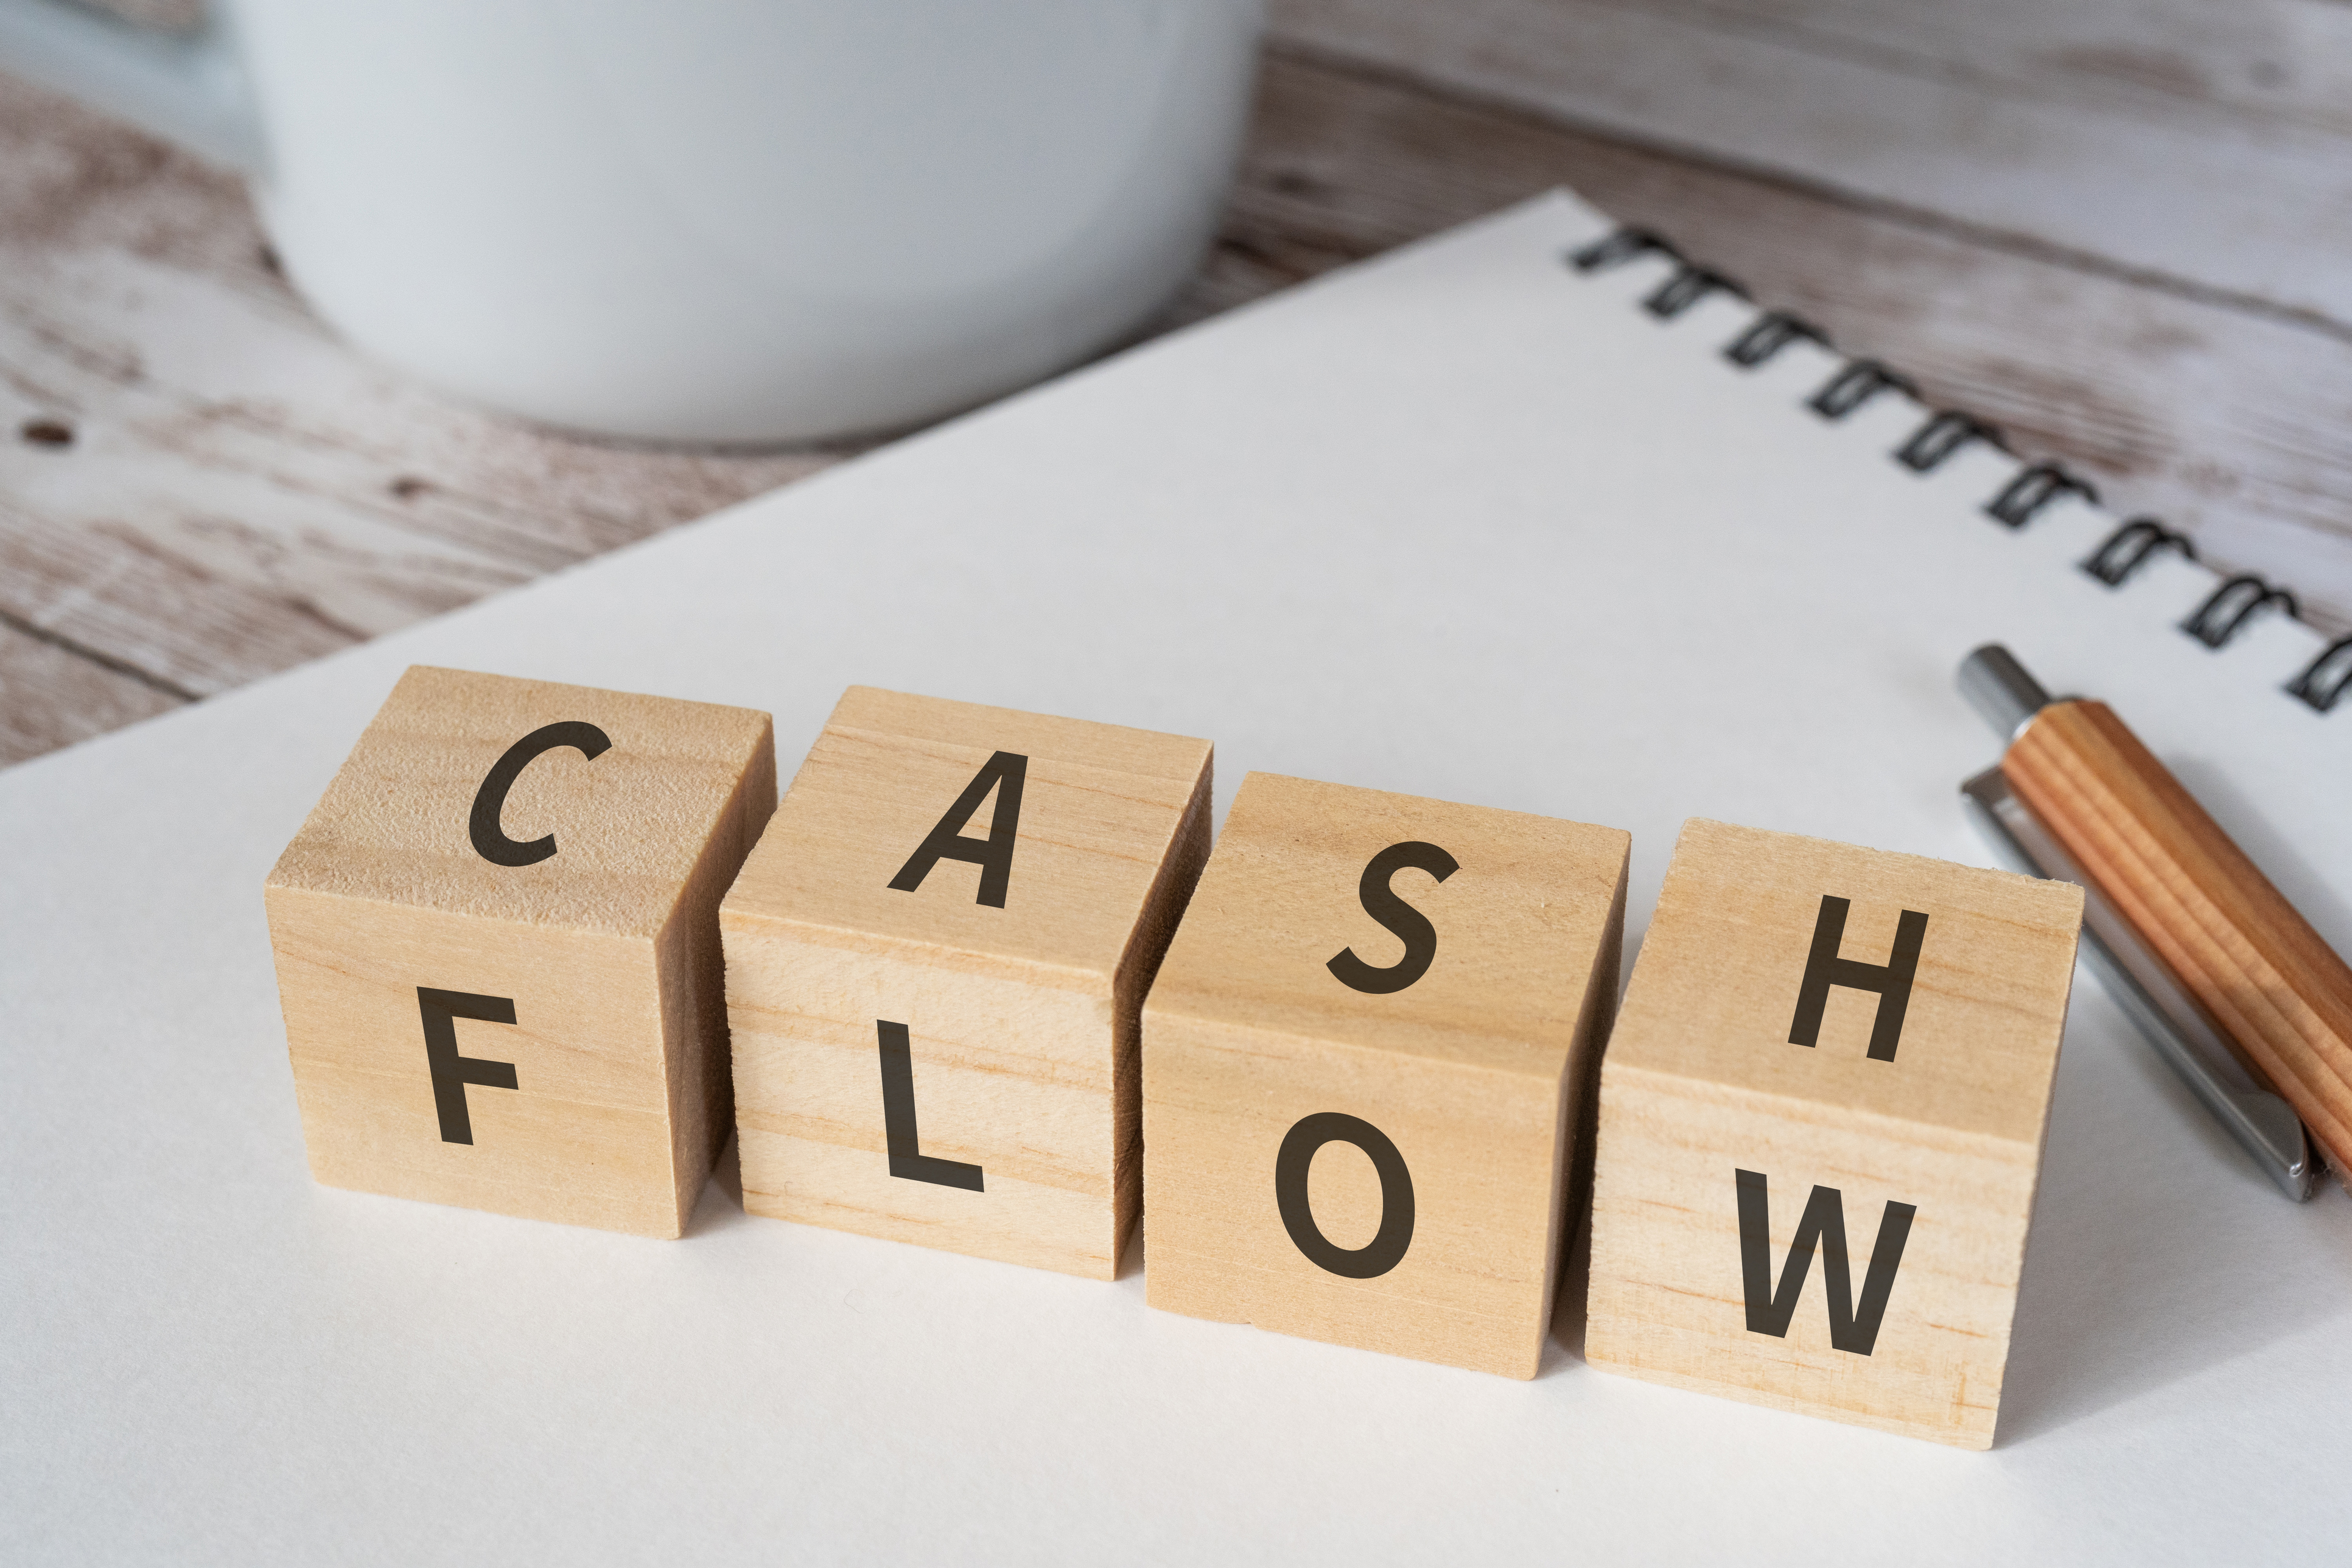 Cashflow Modelling - An Important Tool for Financial Services